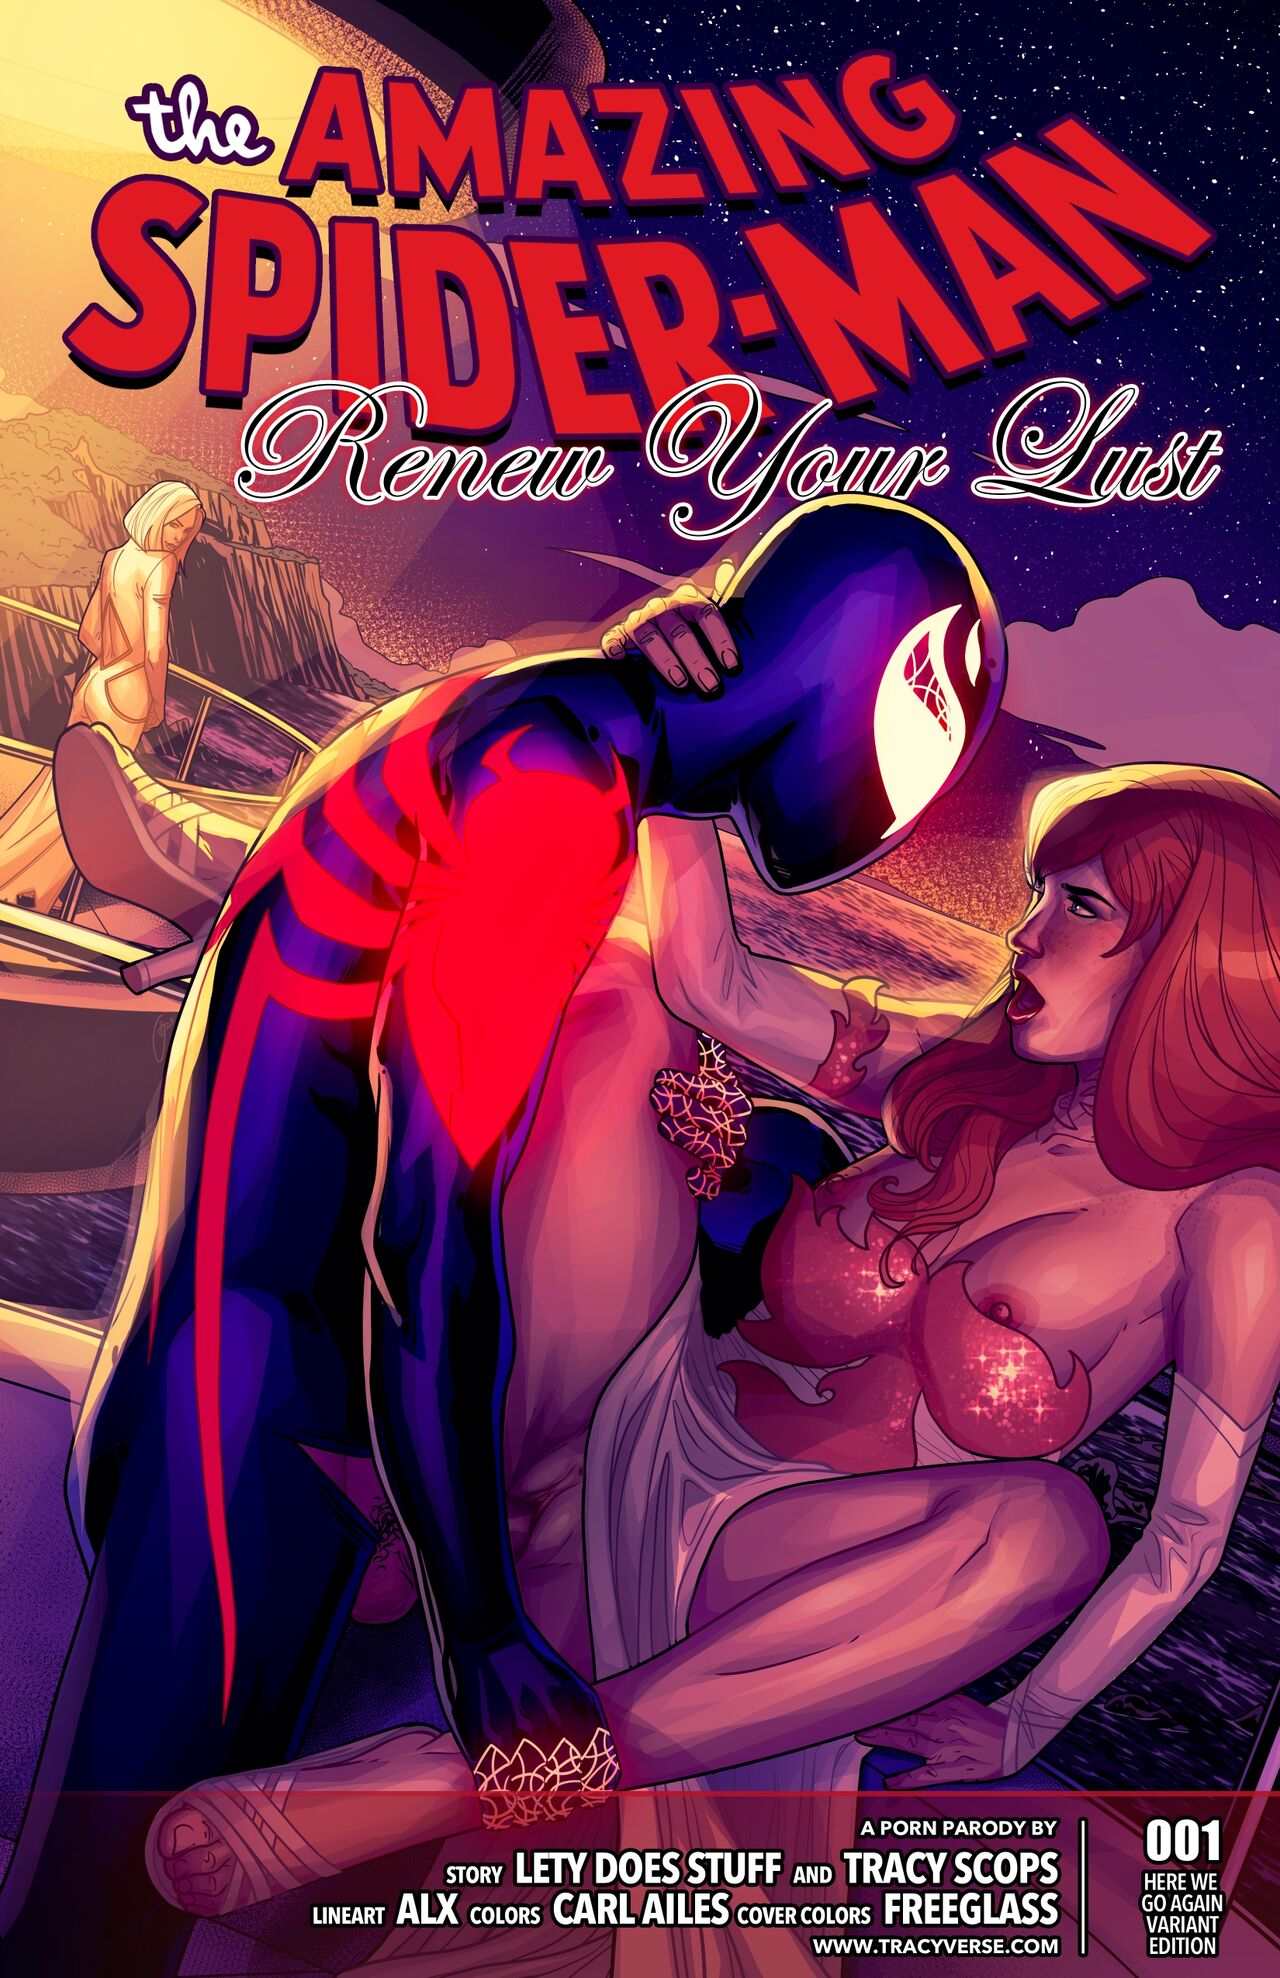 Renew Your Lust (Spider-Man) Tracy Scops - Comics Army